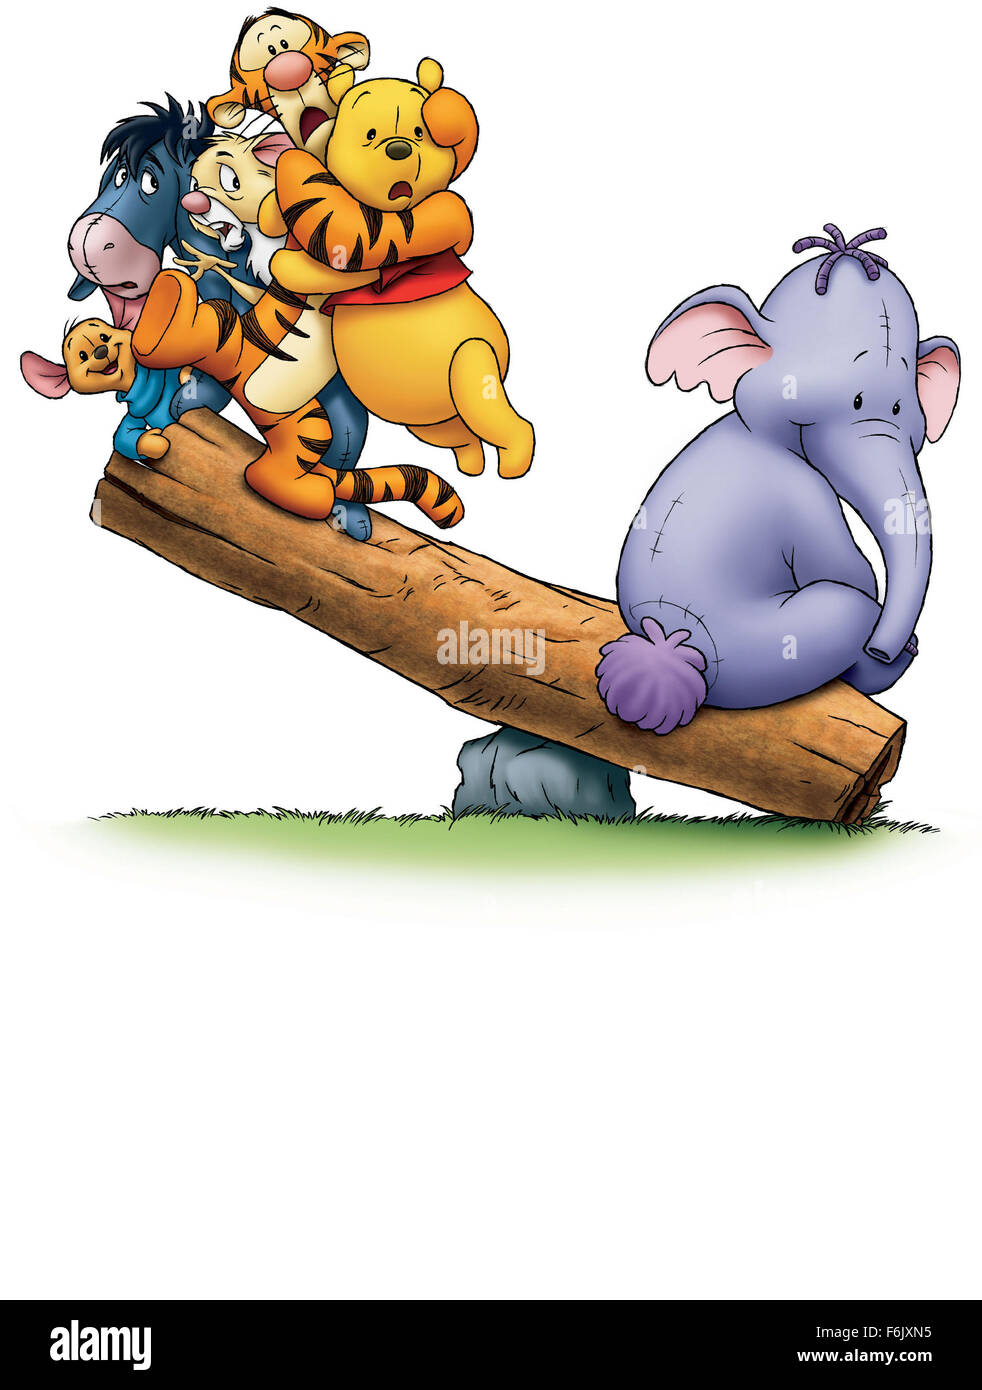 RELEASE DATE: February 11, 2005   MOVIE TITLE: Pooh's Heffalump Movie   STUDIO: Walt Disney Pictures   PLOT: A heffalump is heard trumpeting in the hundred acre woods. Winnie the Pooh, Tigger, and Piglet are scared and rush to Rabbit's house for advice. Roo joins them and they all agree that Heffalumps are nearby after finding a huge footprint. They decide to set out on an expedition to catch the Heffalump. Roo is not allowed to come along because he is too little. Directed by Frank Nissen.   PICTURED: Characters from the movie.   (Credit Image: c Walt Disney Pictures/Entertainment Pictures/ZU Stock Photo